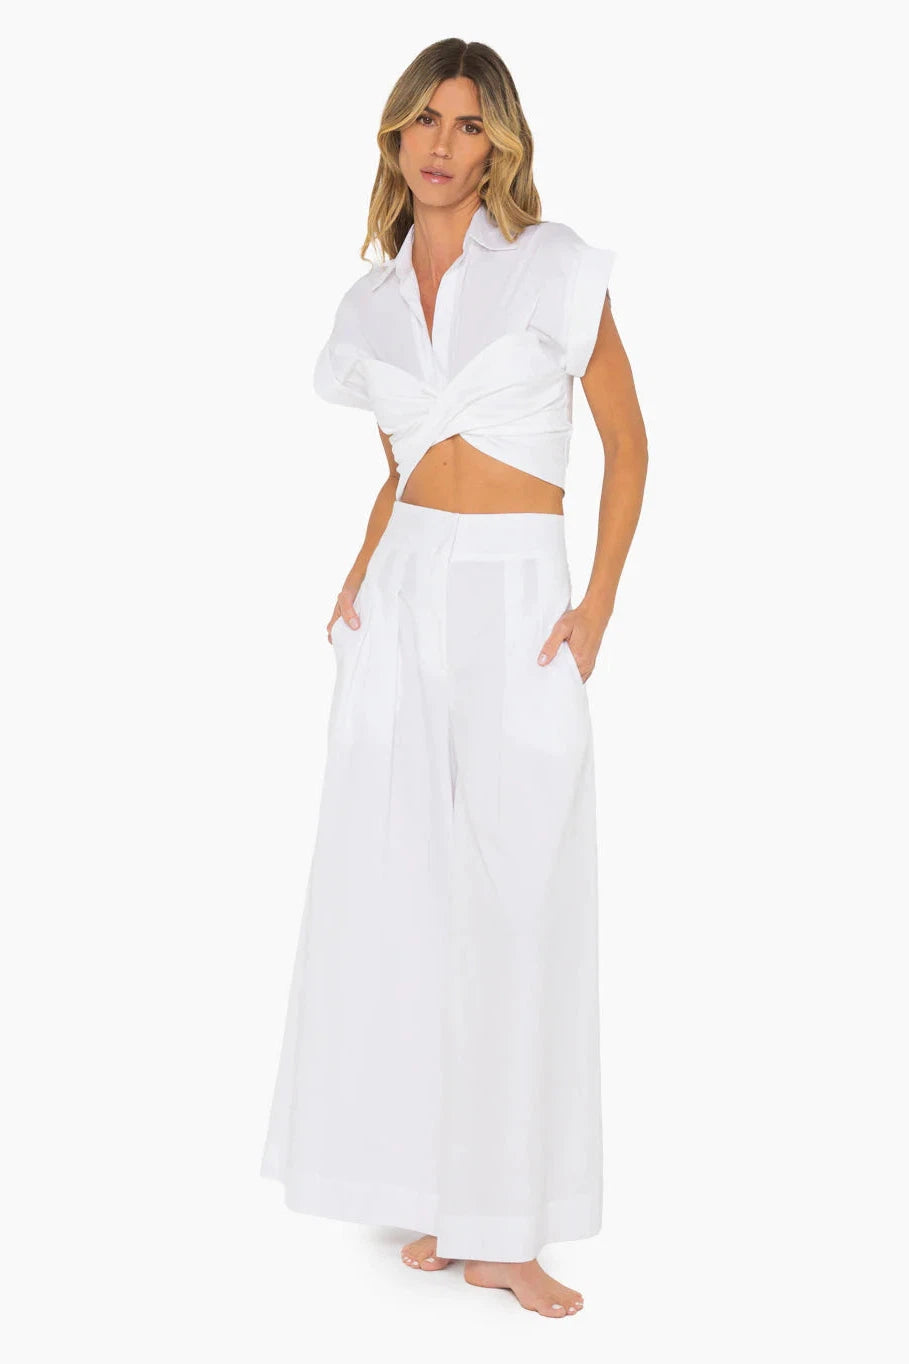 JBQ THE LABEL LOGAN PANT IN WHITE